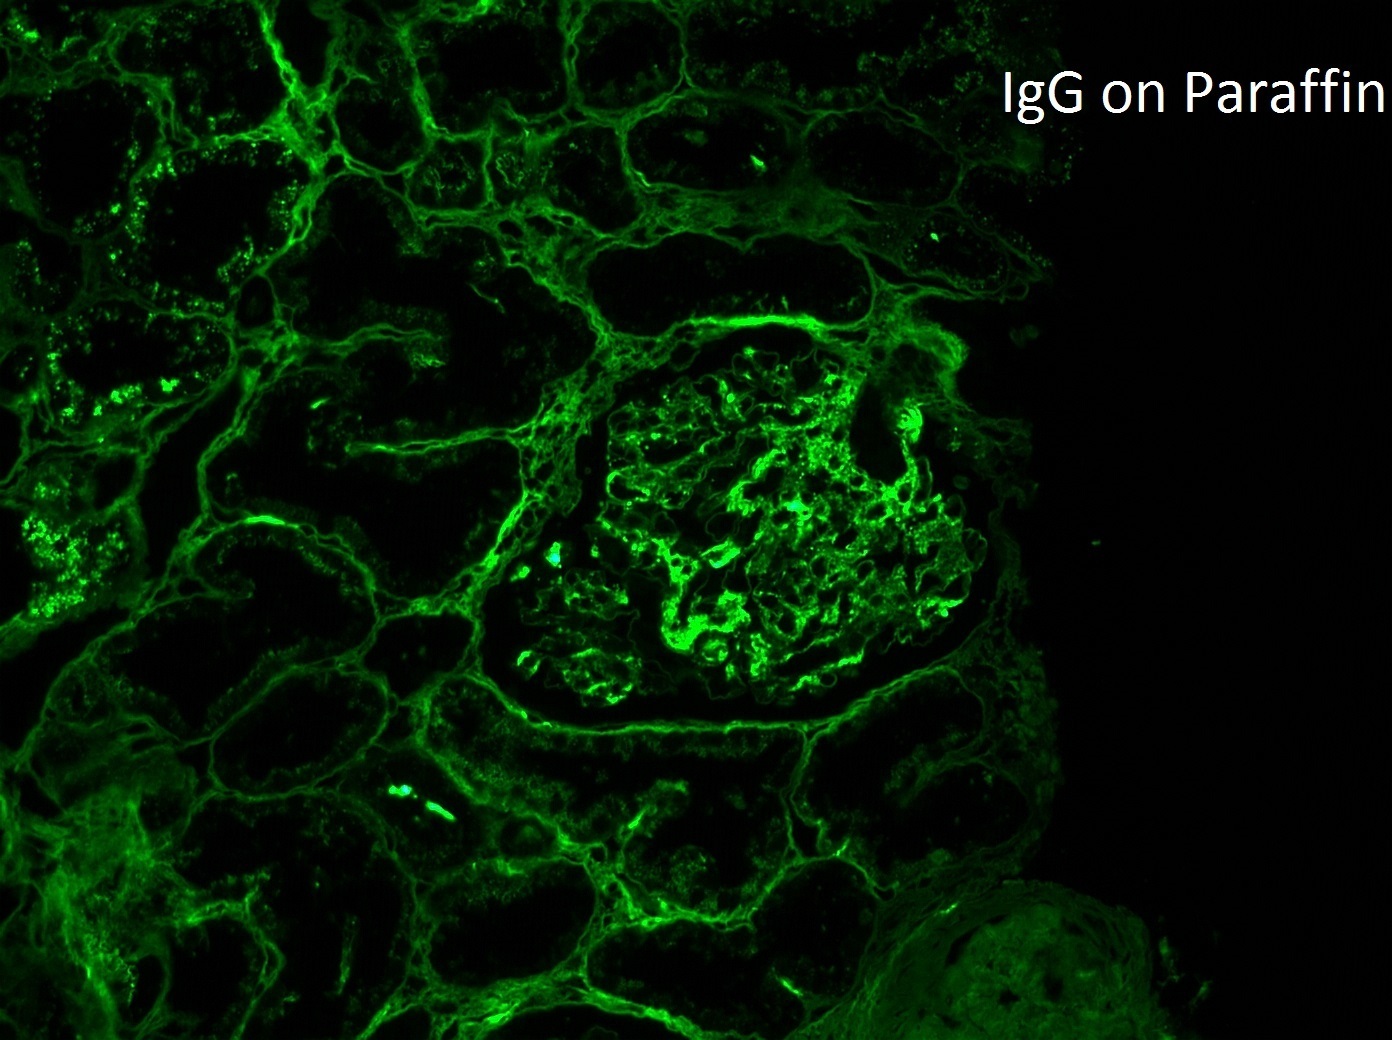 monoclonal IgG kappa deposits refers to a glomerulonephritis which stains for IgG, C3, and kappa by direct immunofluorescence